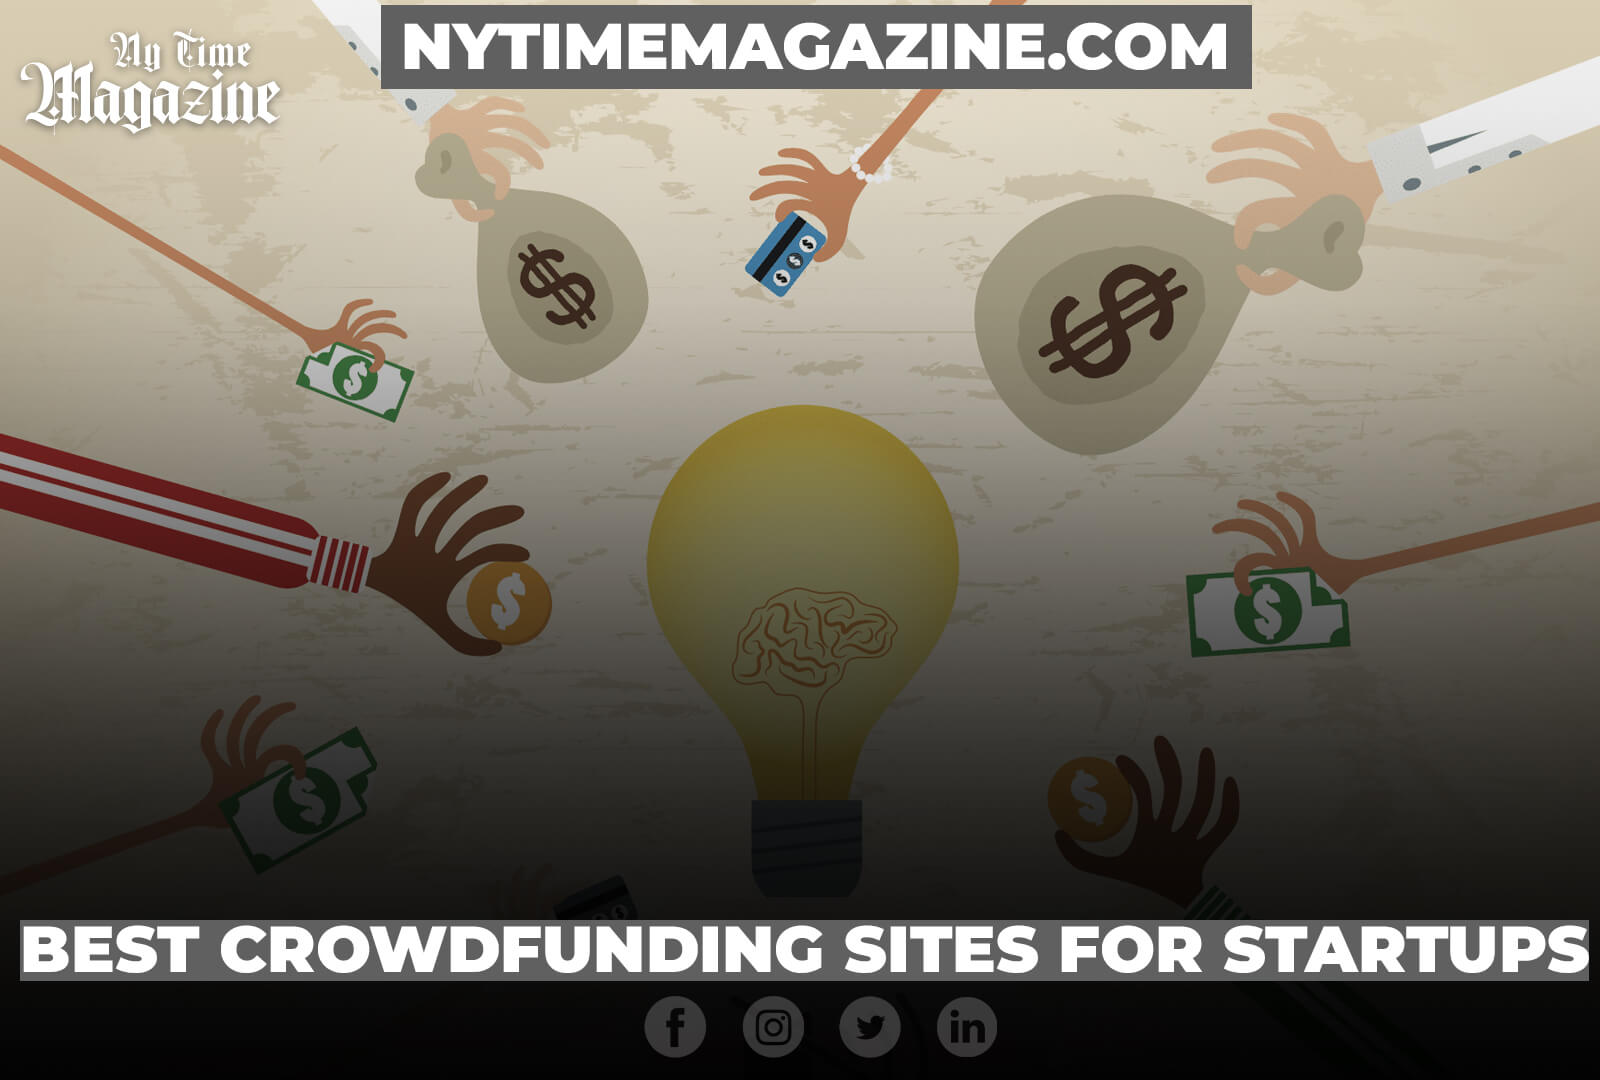 Best Crowdfunding Sites for Startups